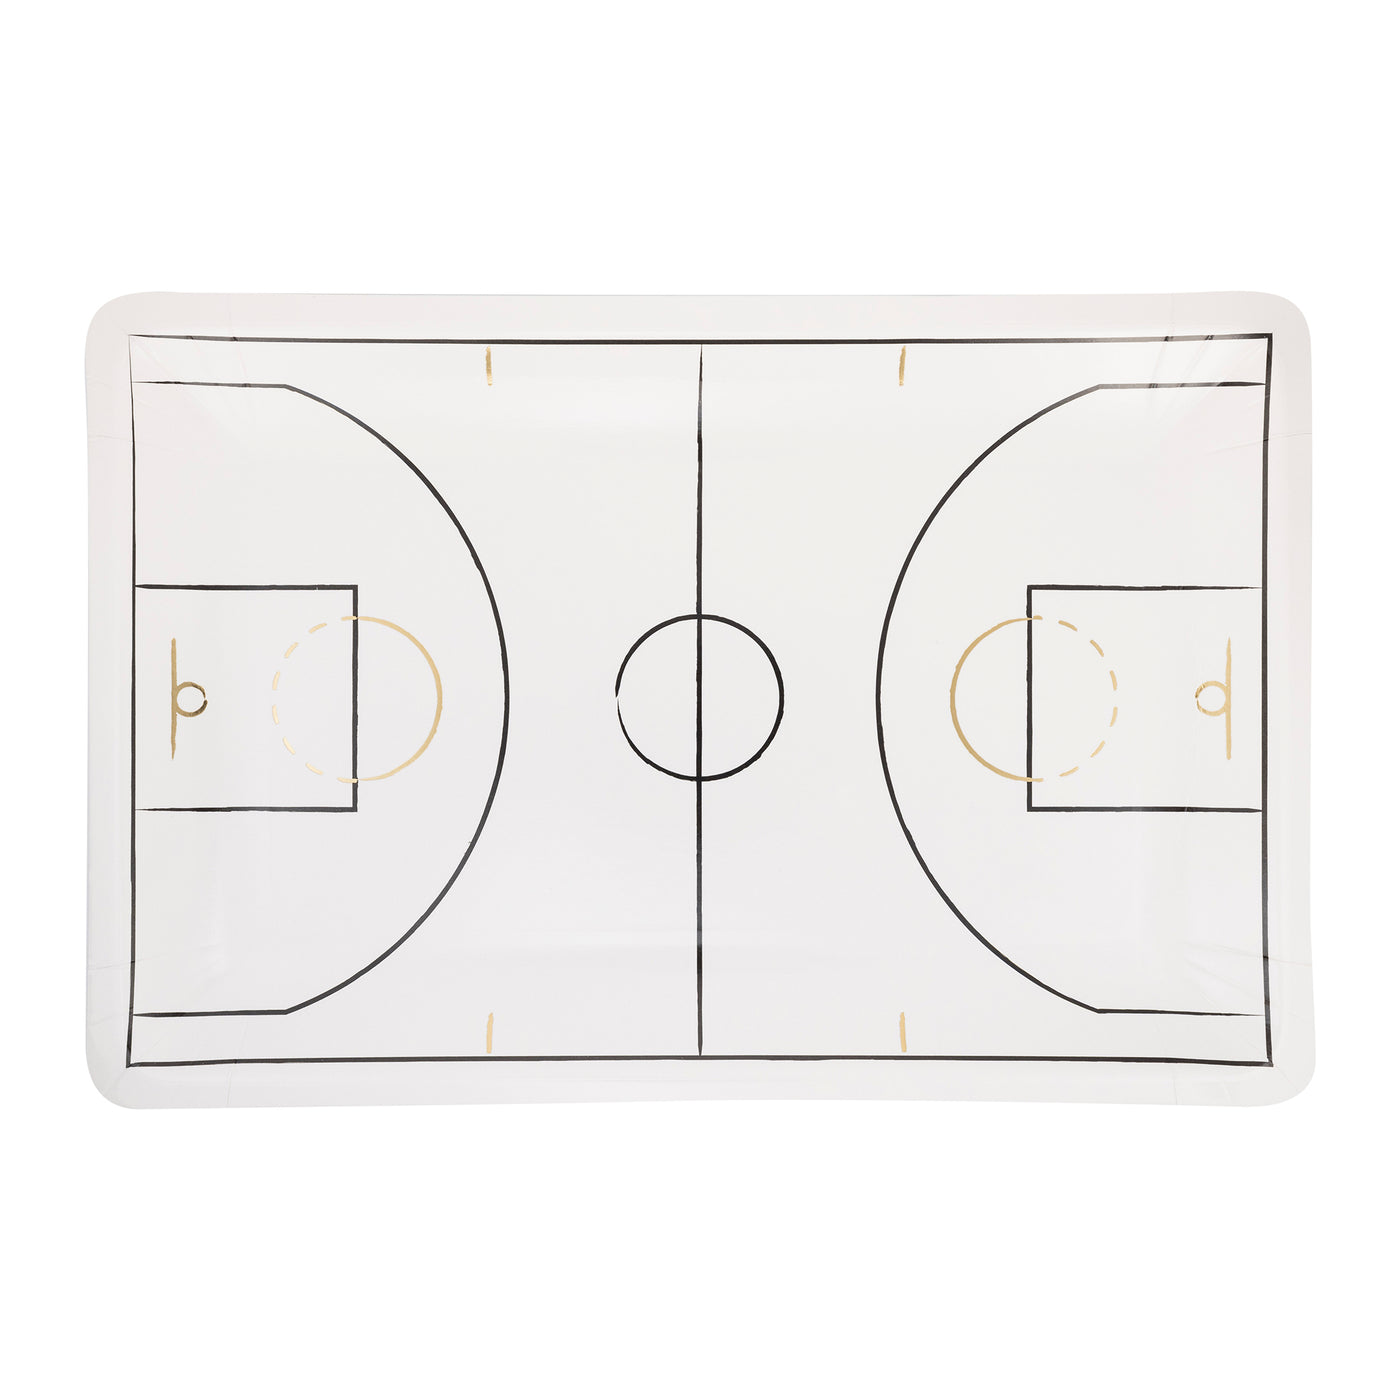 BBL1041 - Basketball Court Shaped Paper Plate